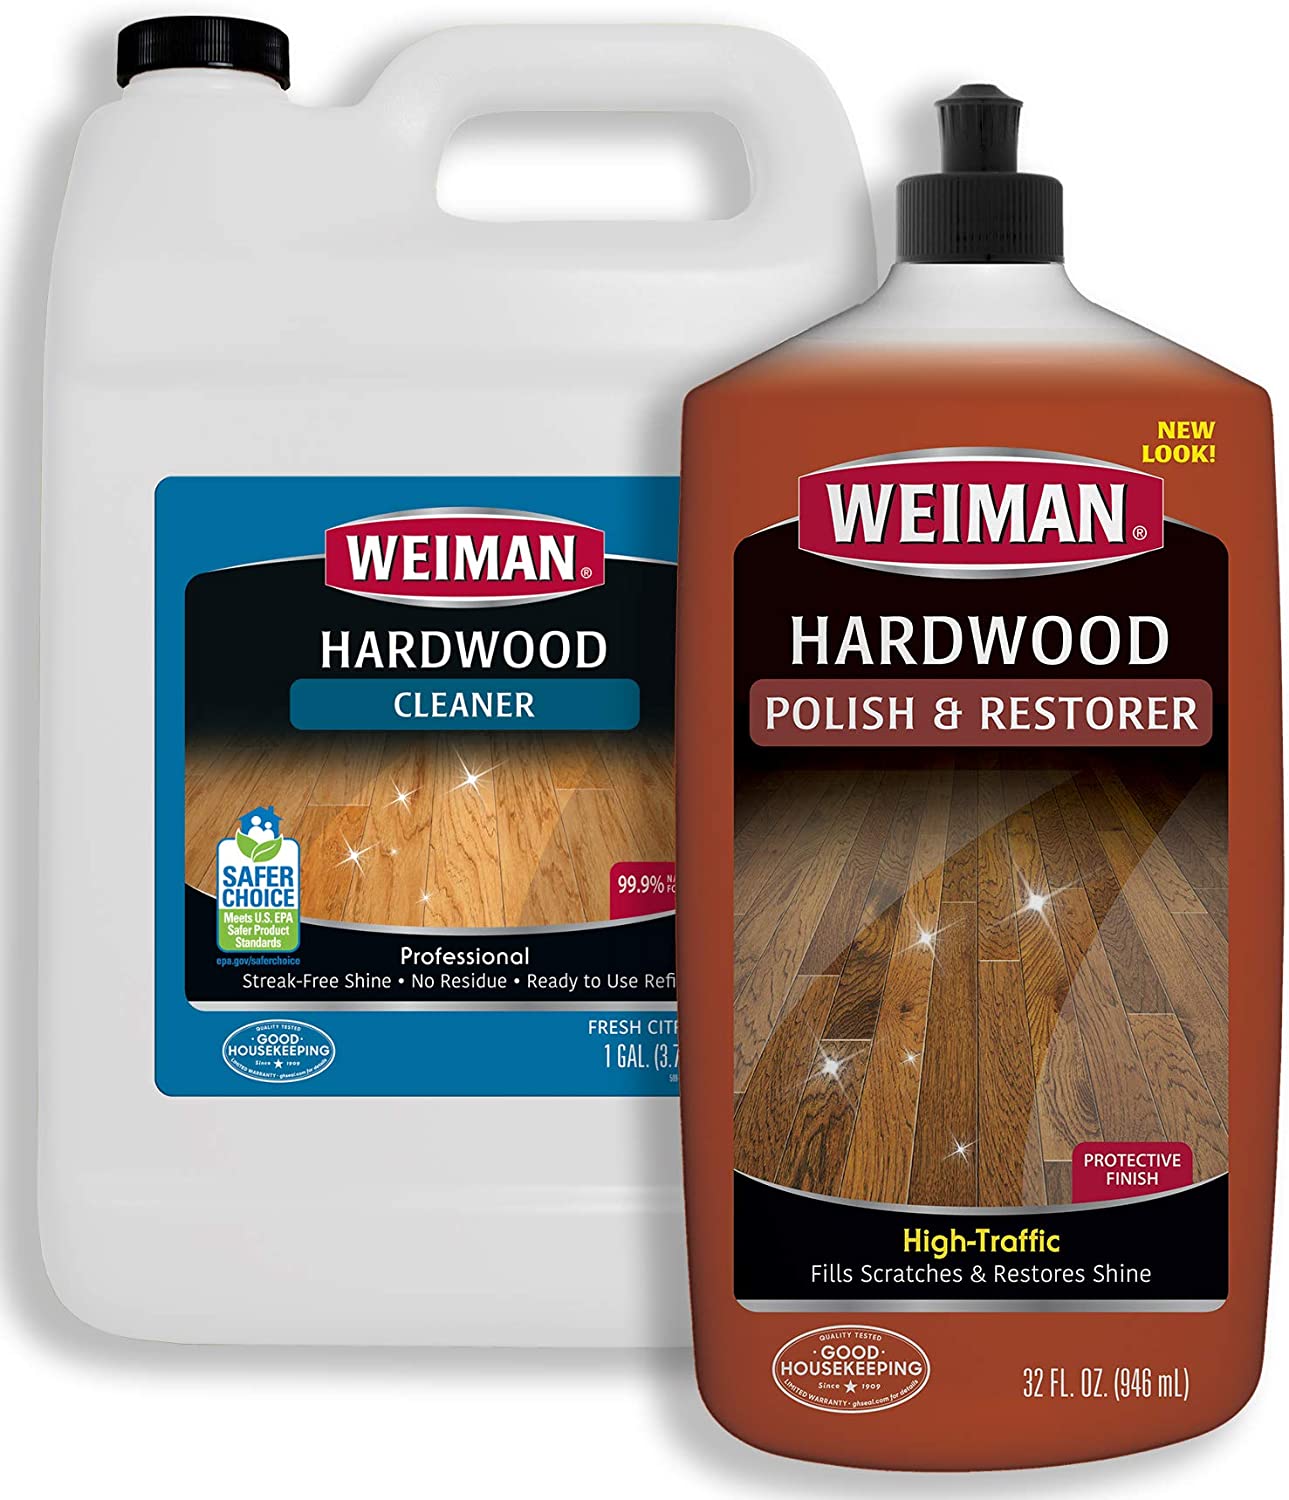 Weiman Hardwood Floor Cleaner and Polish - 128 Ounce Cleaner and 32 Ounce Polish - High-Traffic Hardwood Floor, Natural Shine, Removes Scratches, Leaves Protective Layer - Packaging May Vary